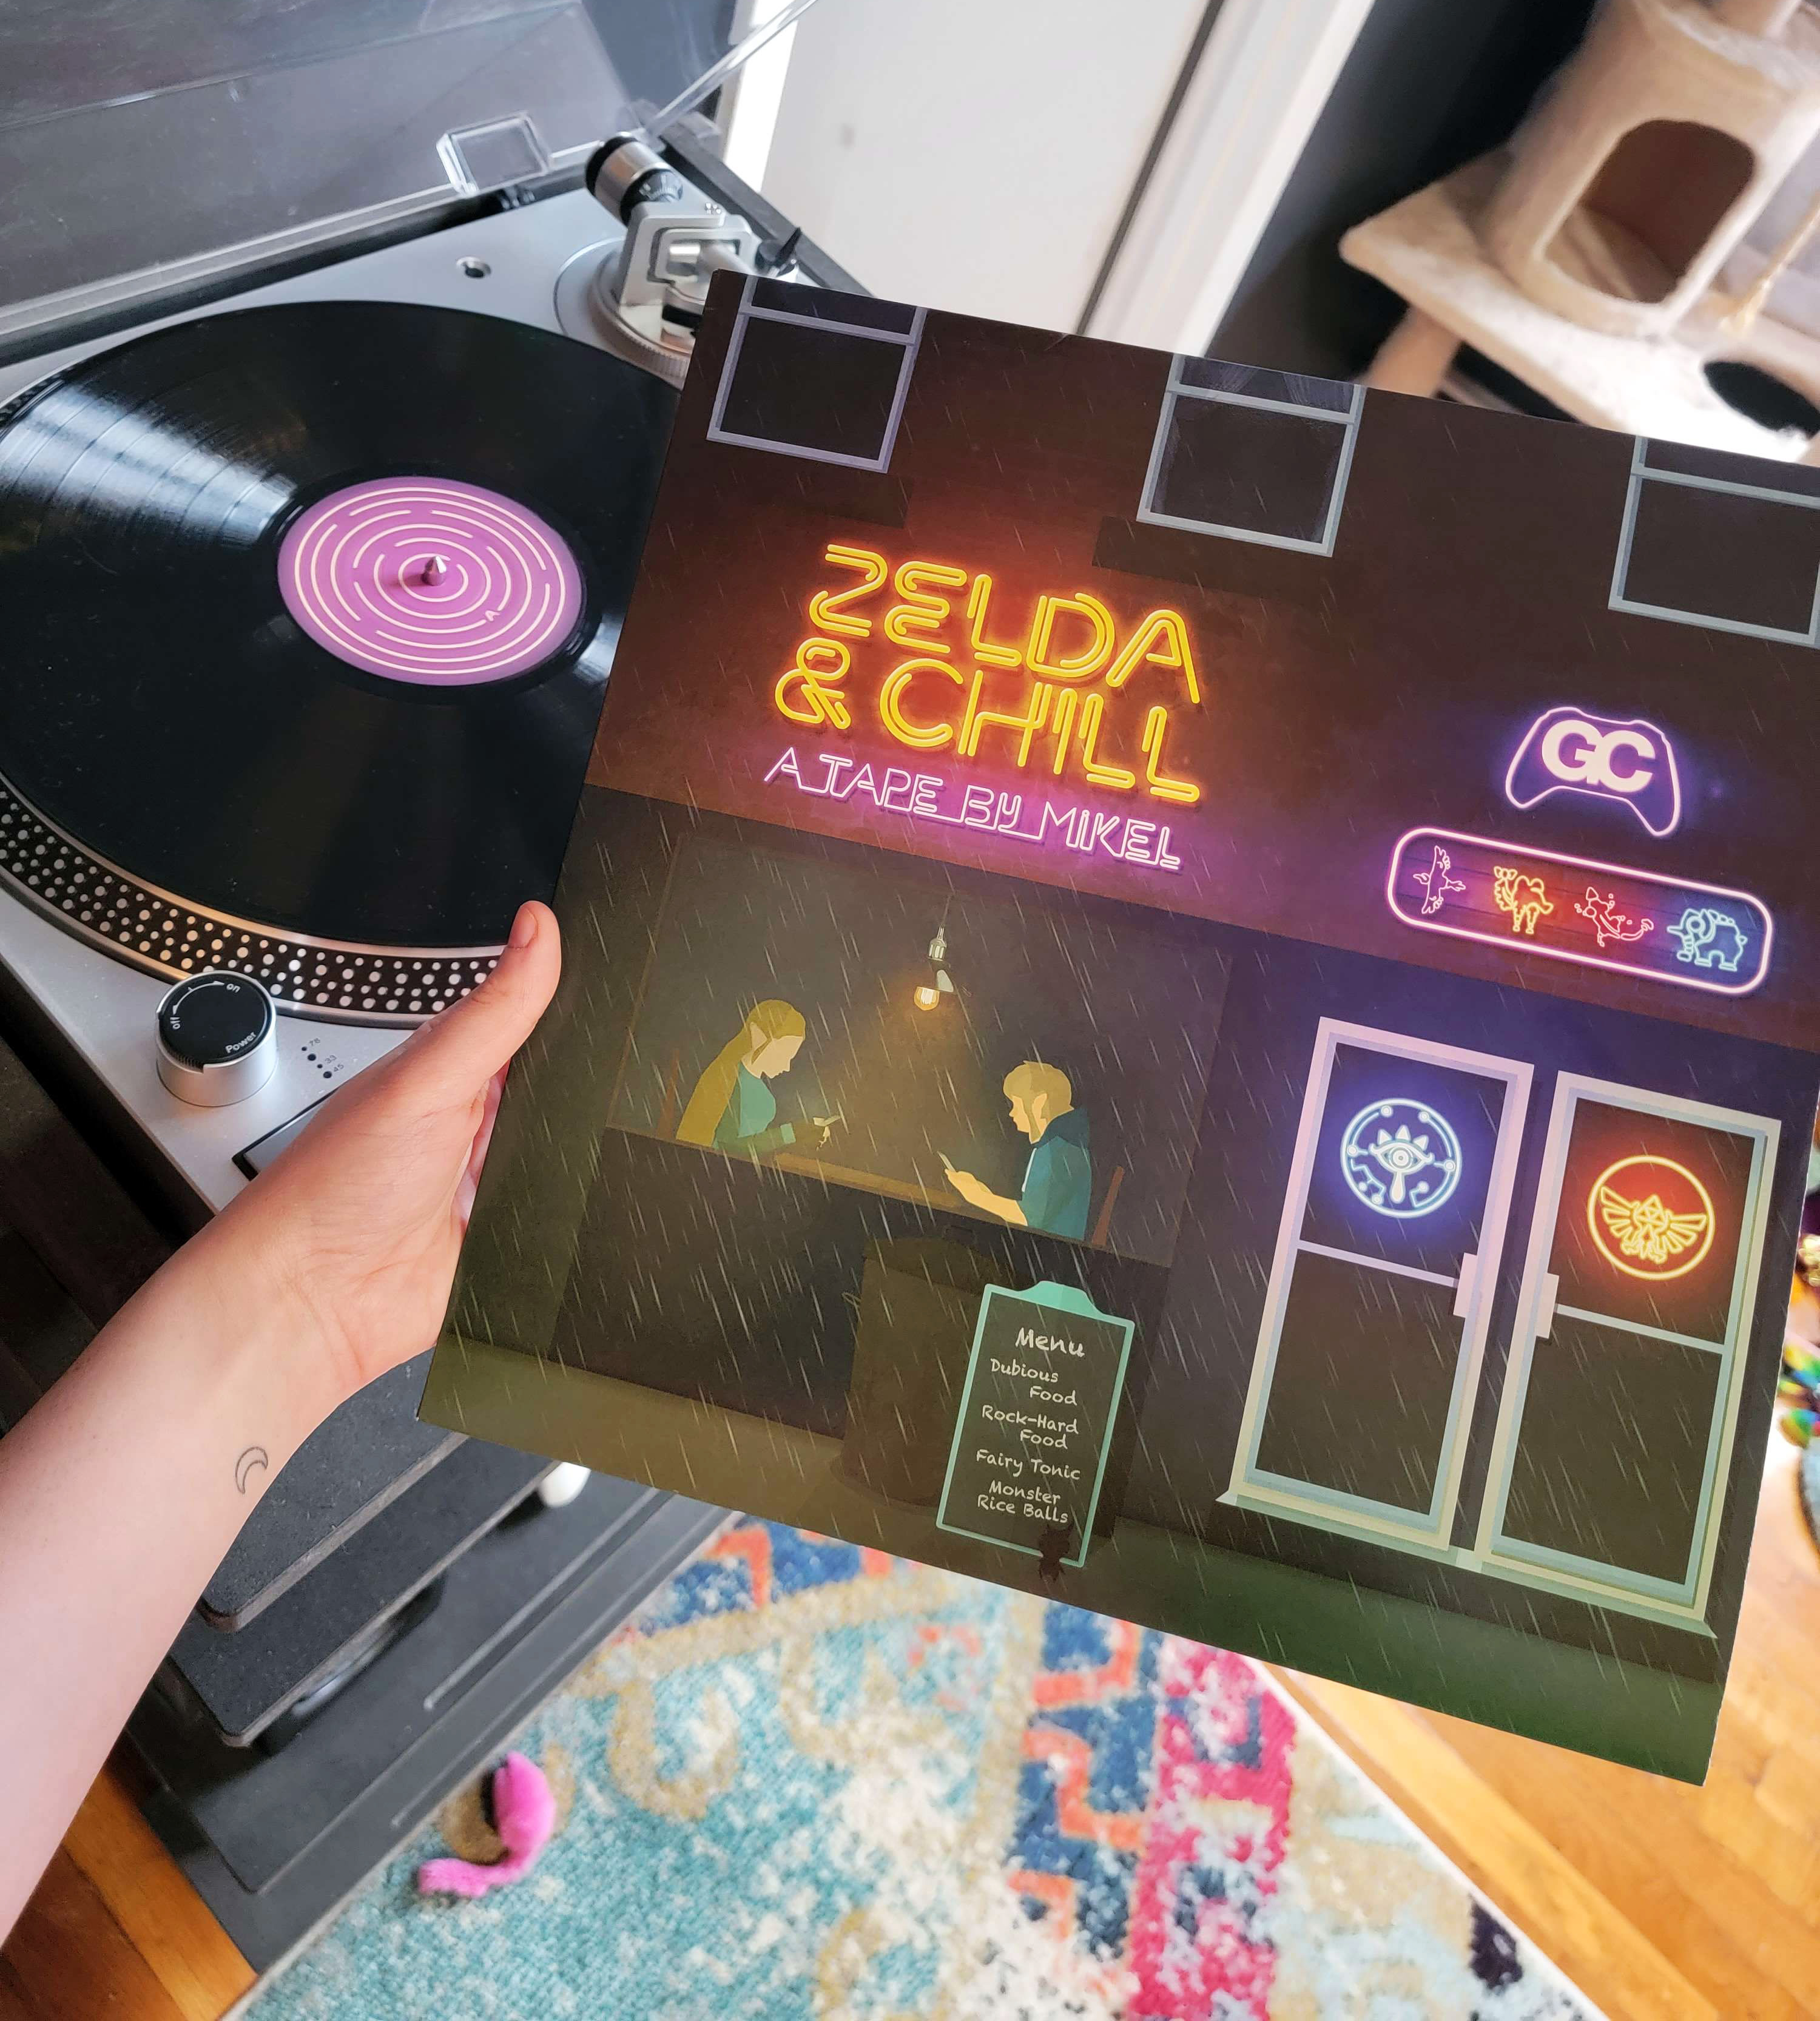 the zelda and chill vinyl art and the record sitting on a nearby record player